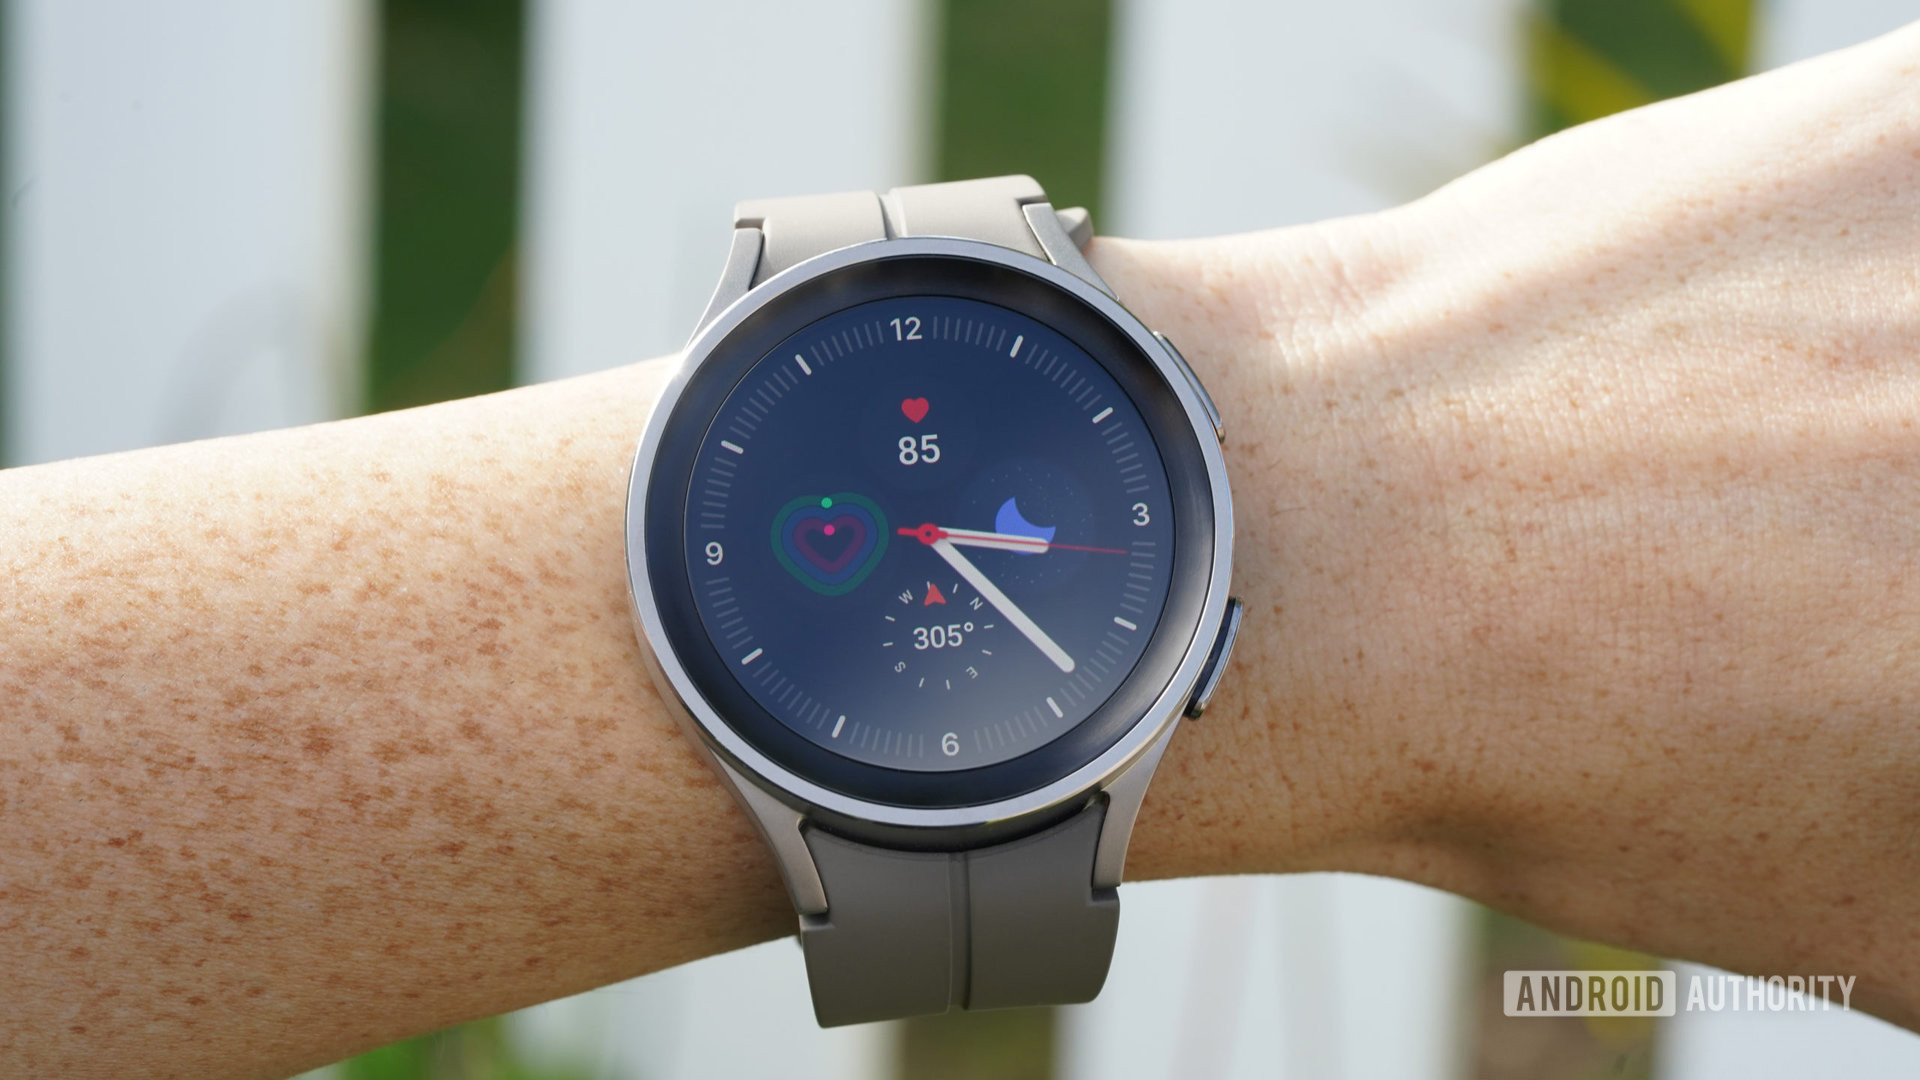 Galaxy Watch 5 Pro on the user's wrist displays the watch face.